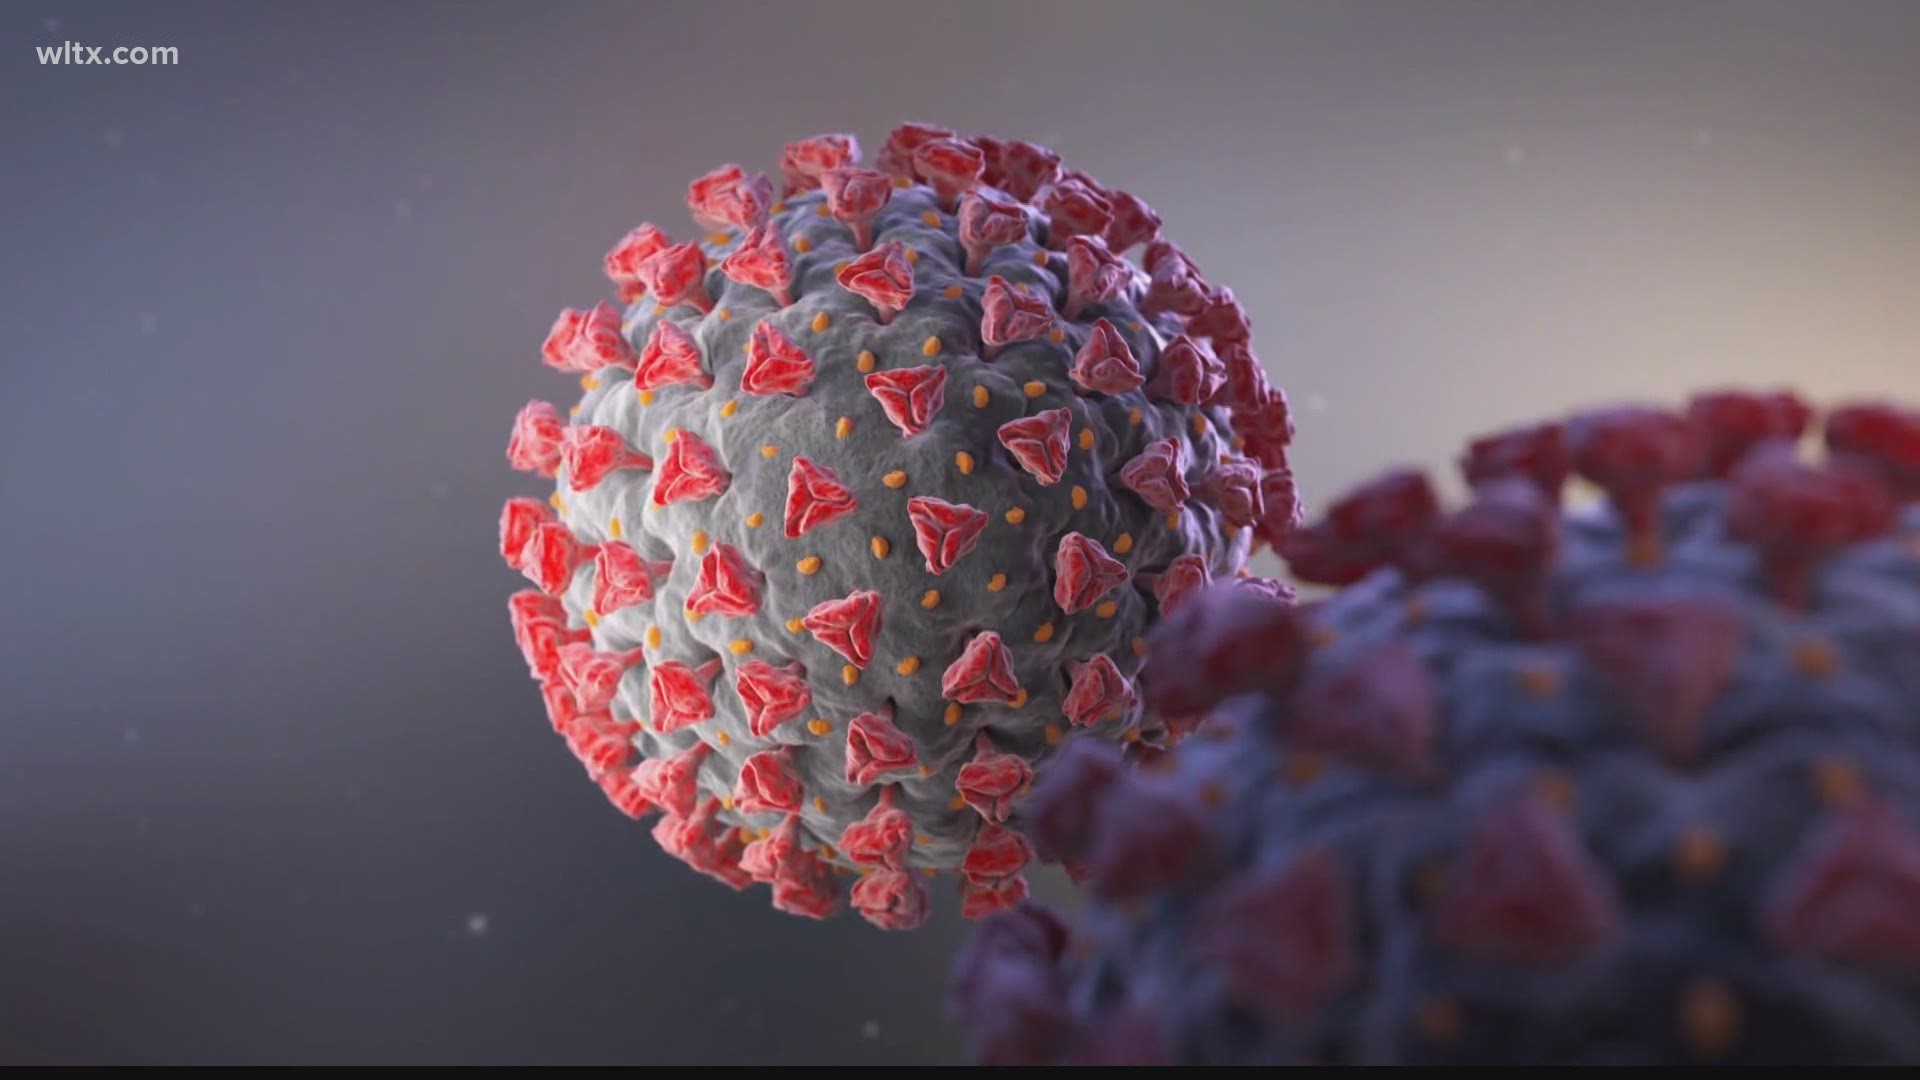 Studies are underway to learn more about the long-term effects of the virus – a condition state health officials call “long COVID.”